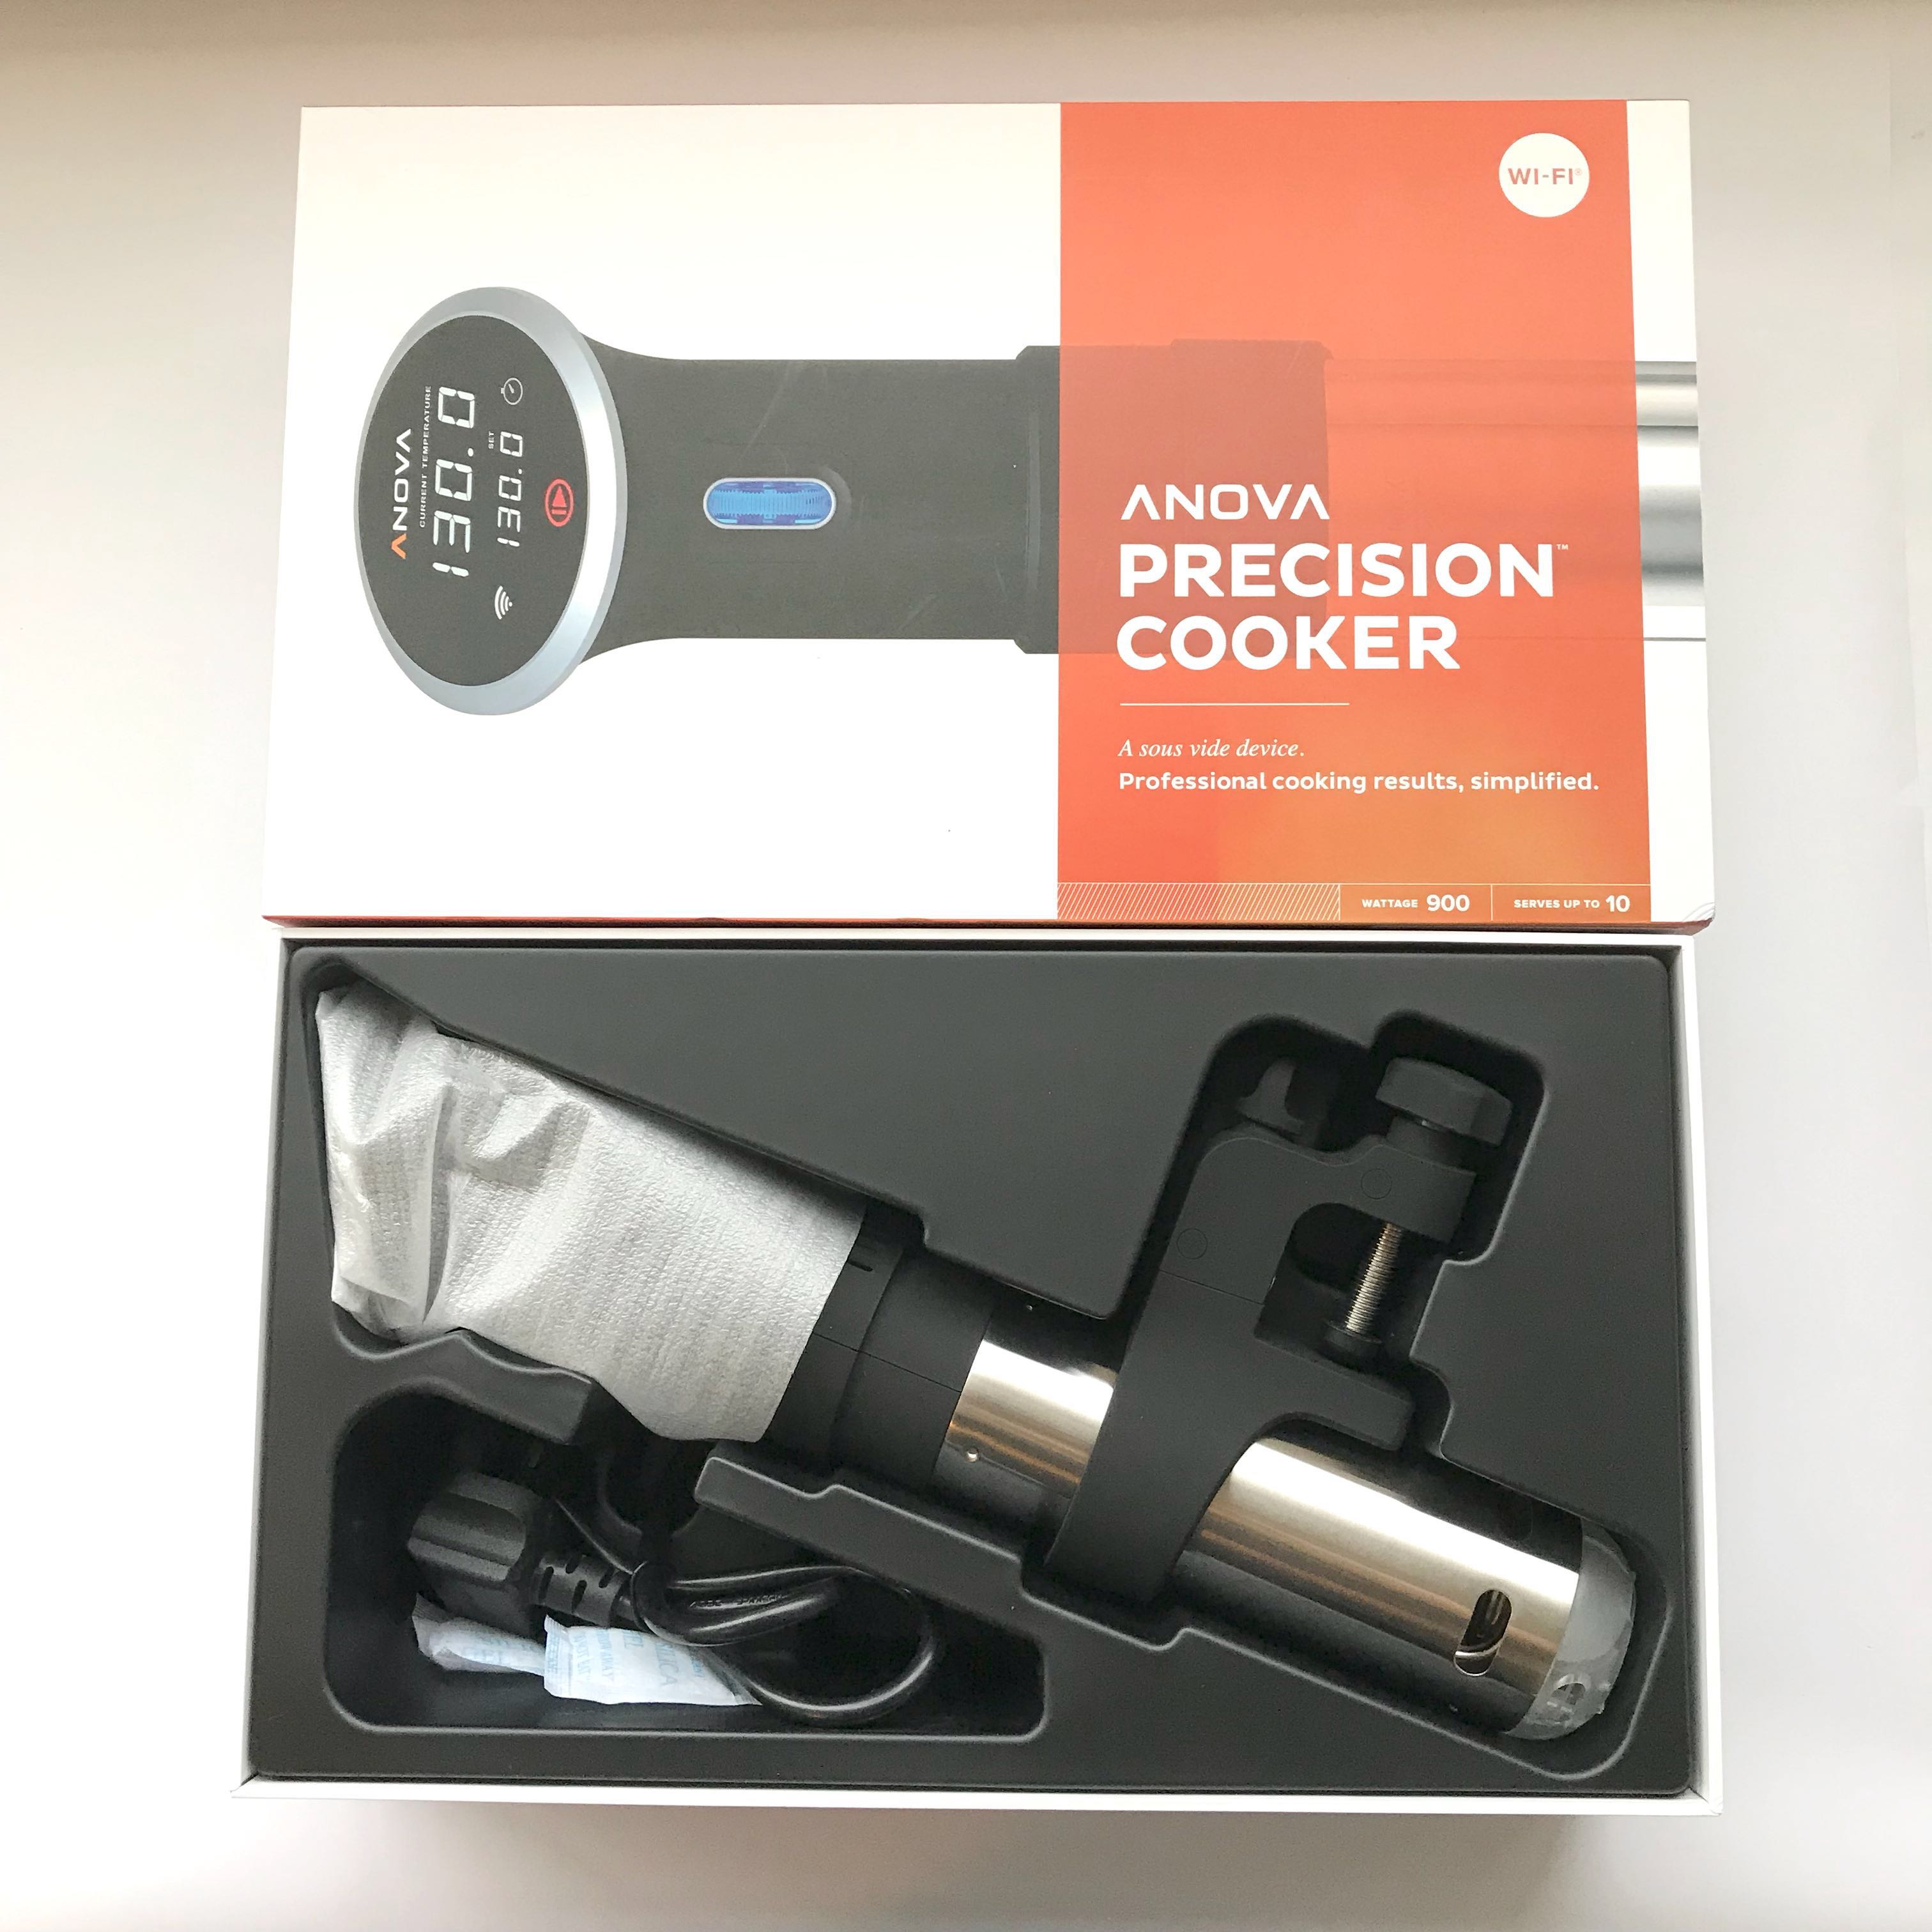 https://media.karousell.com/media/photos/products/2018/07/25/the_anova_precision_sous_vide_cooker_with_bluetooth_and_wifi_1532501883_551b03e4.jpg